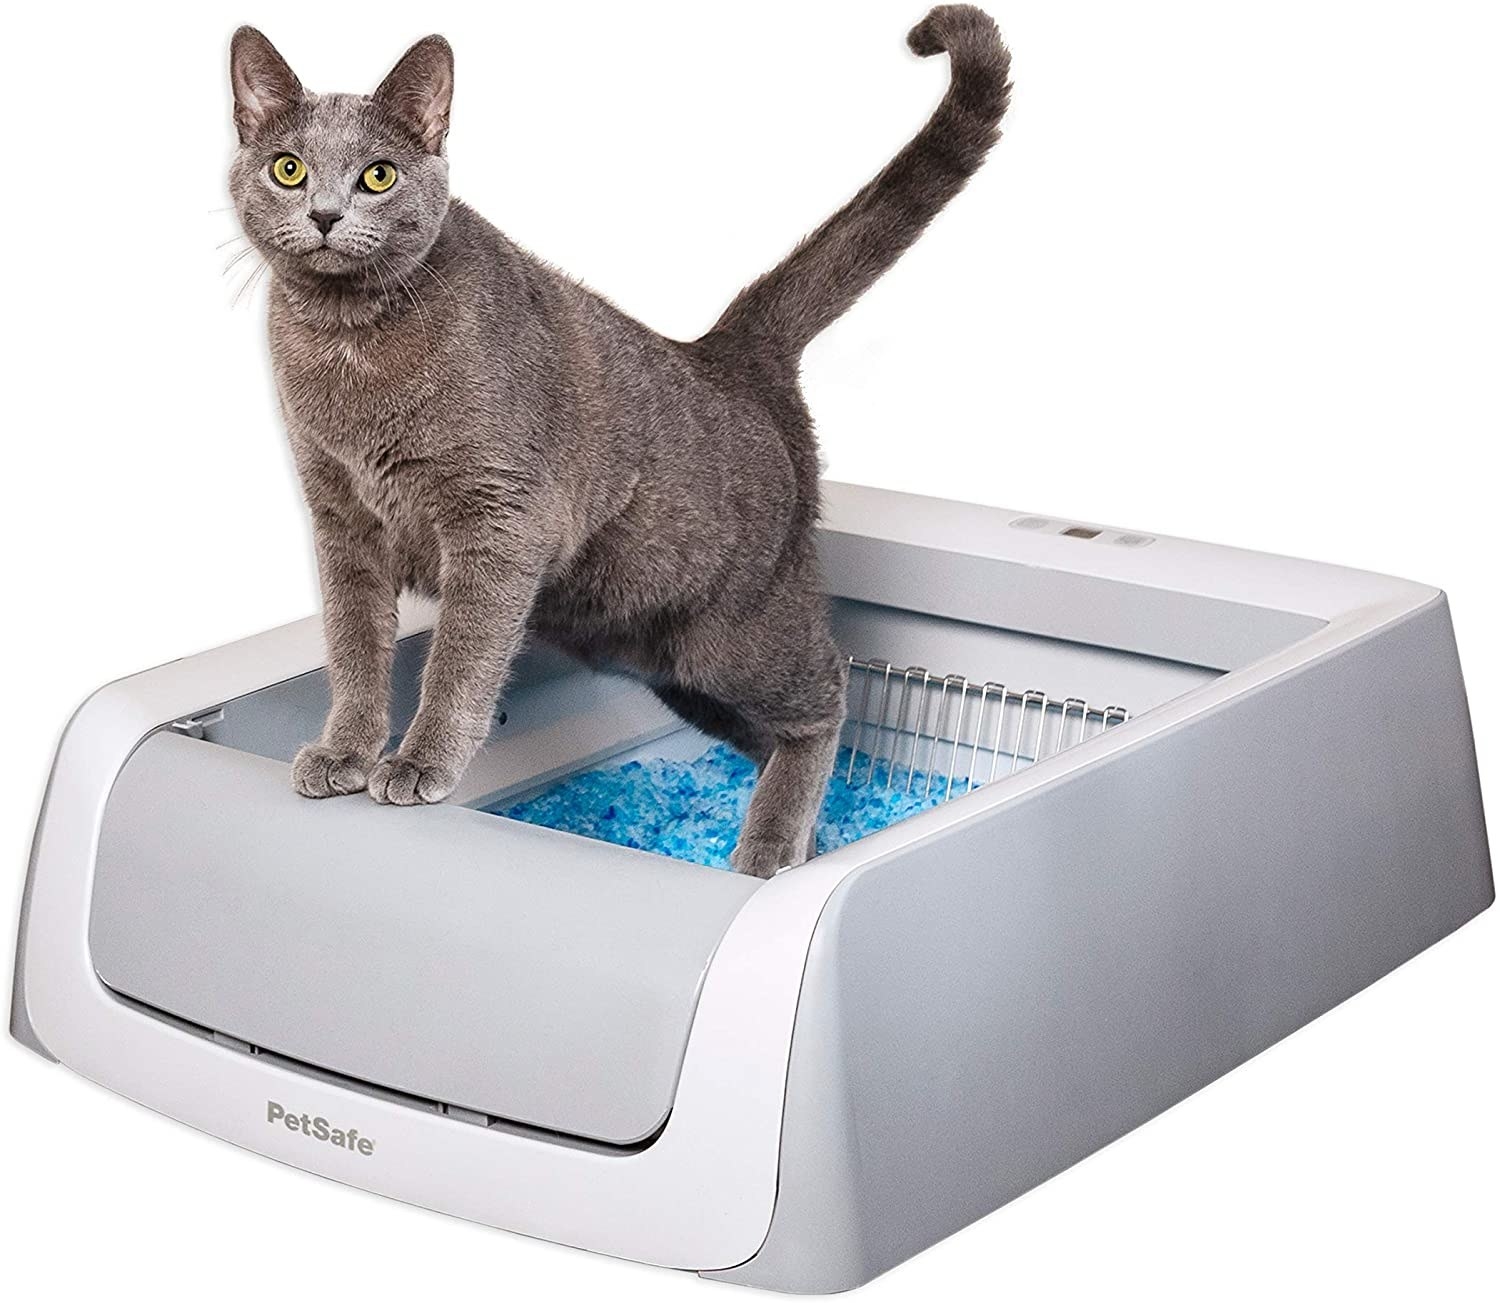 Gray cat in the automatic litter box with blue litter crystals